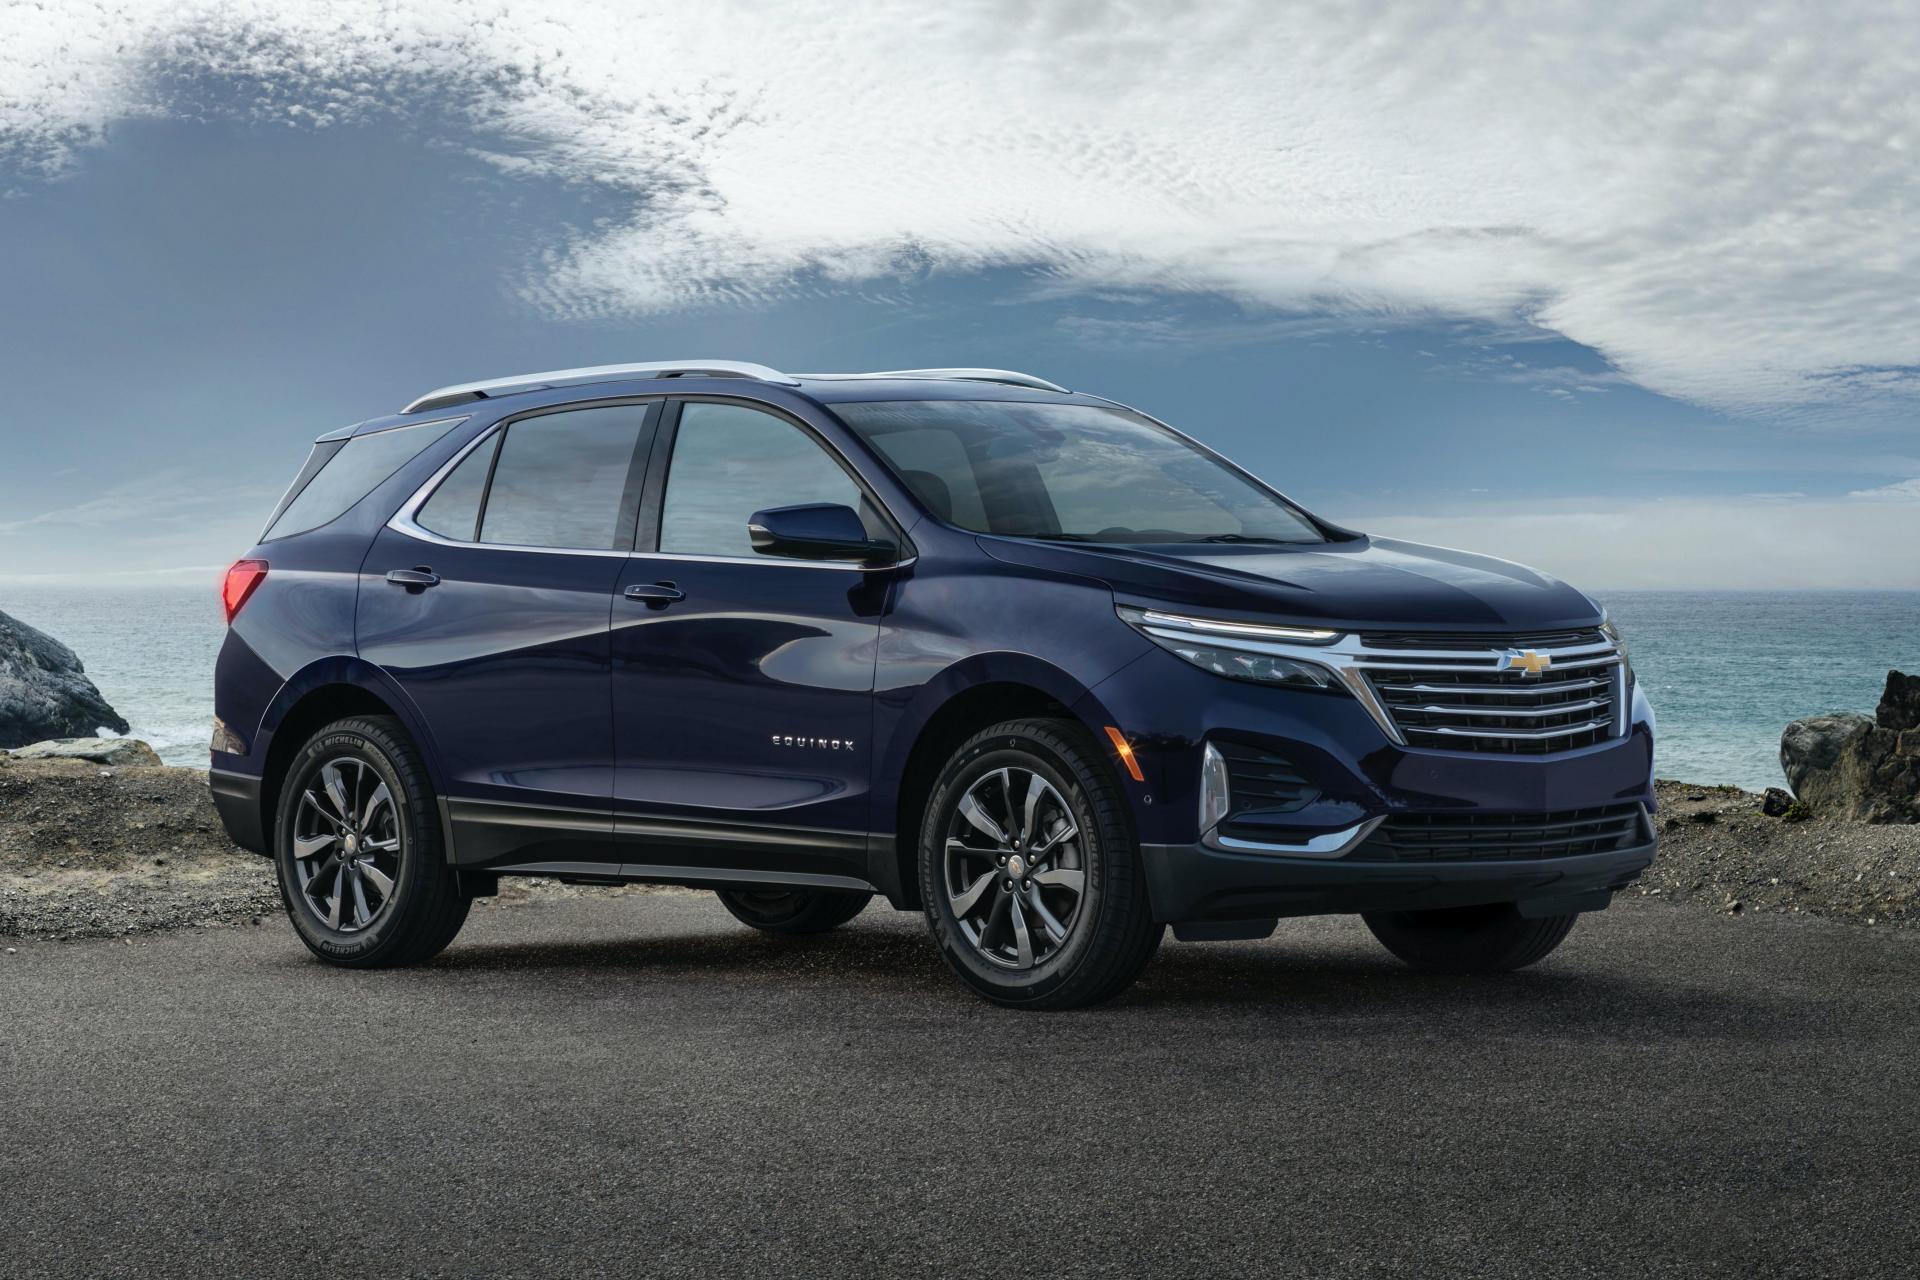 Chevy updates Equinox for 2021